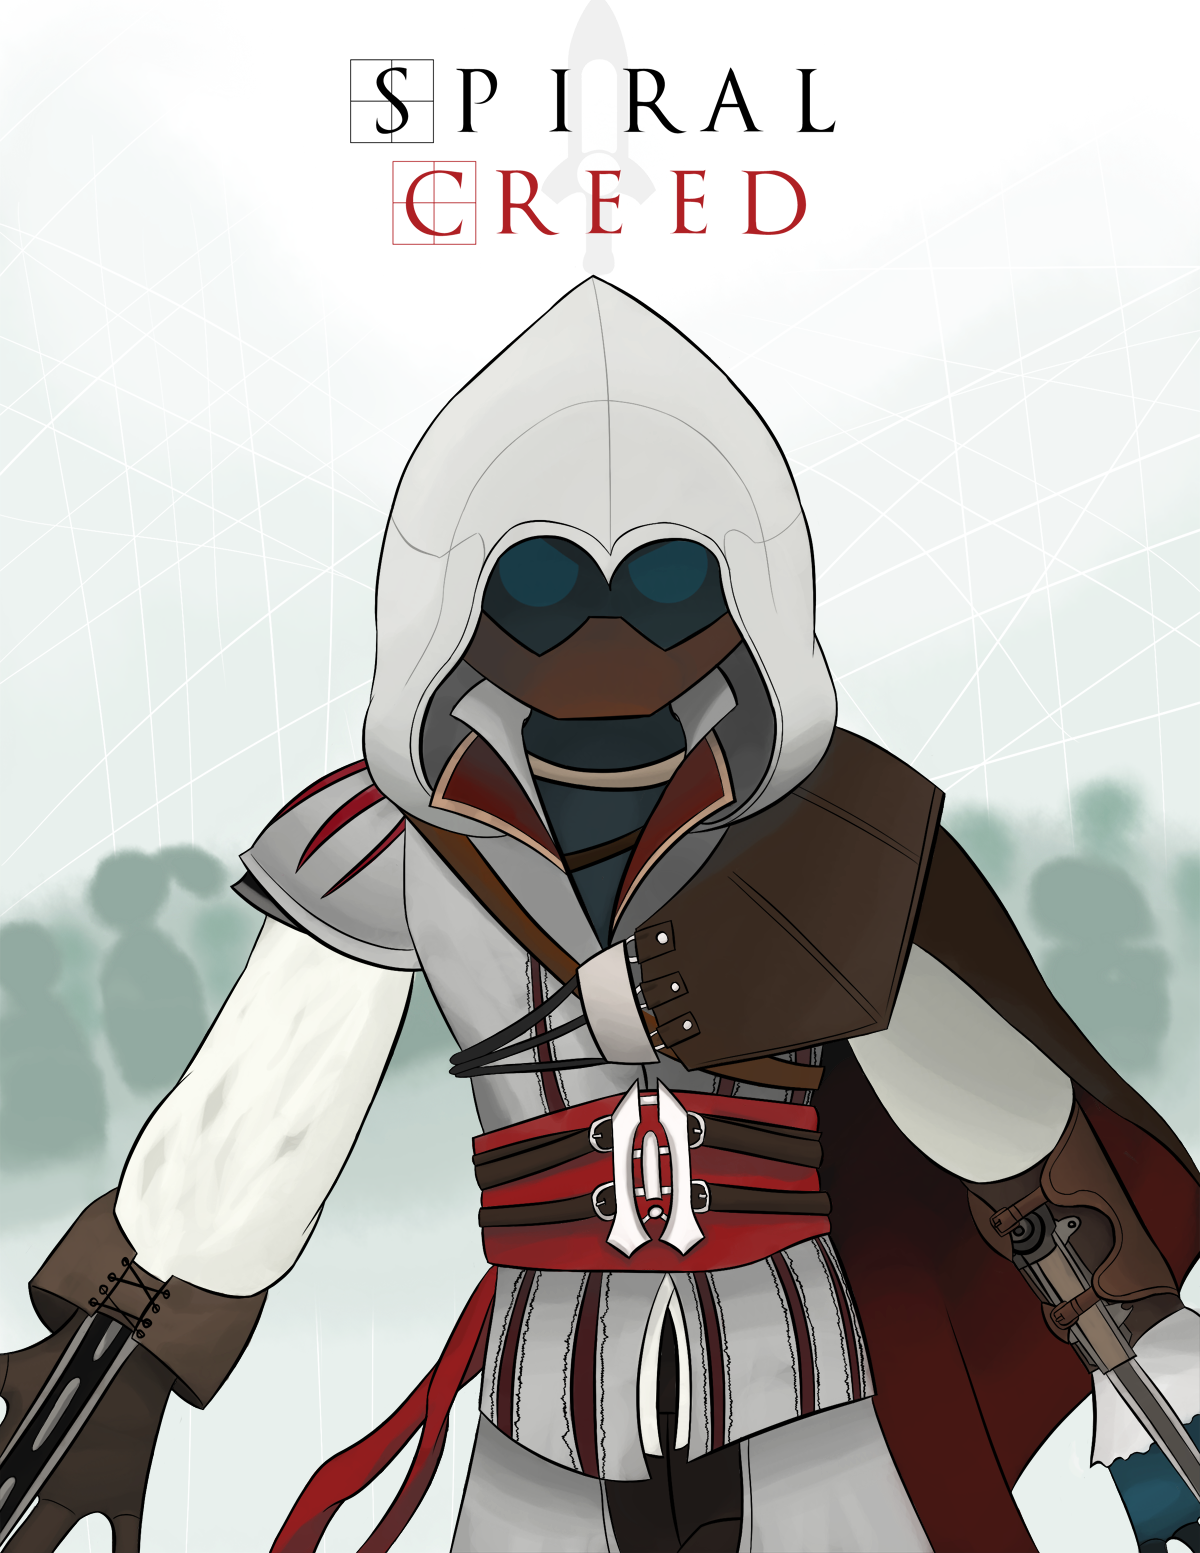 Spiral creed.png